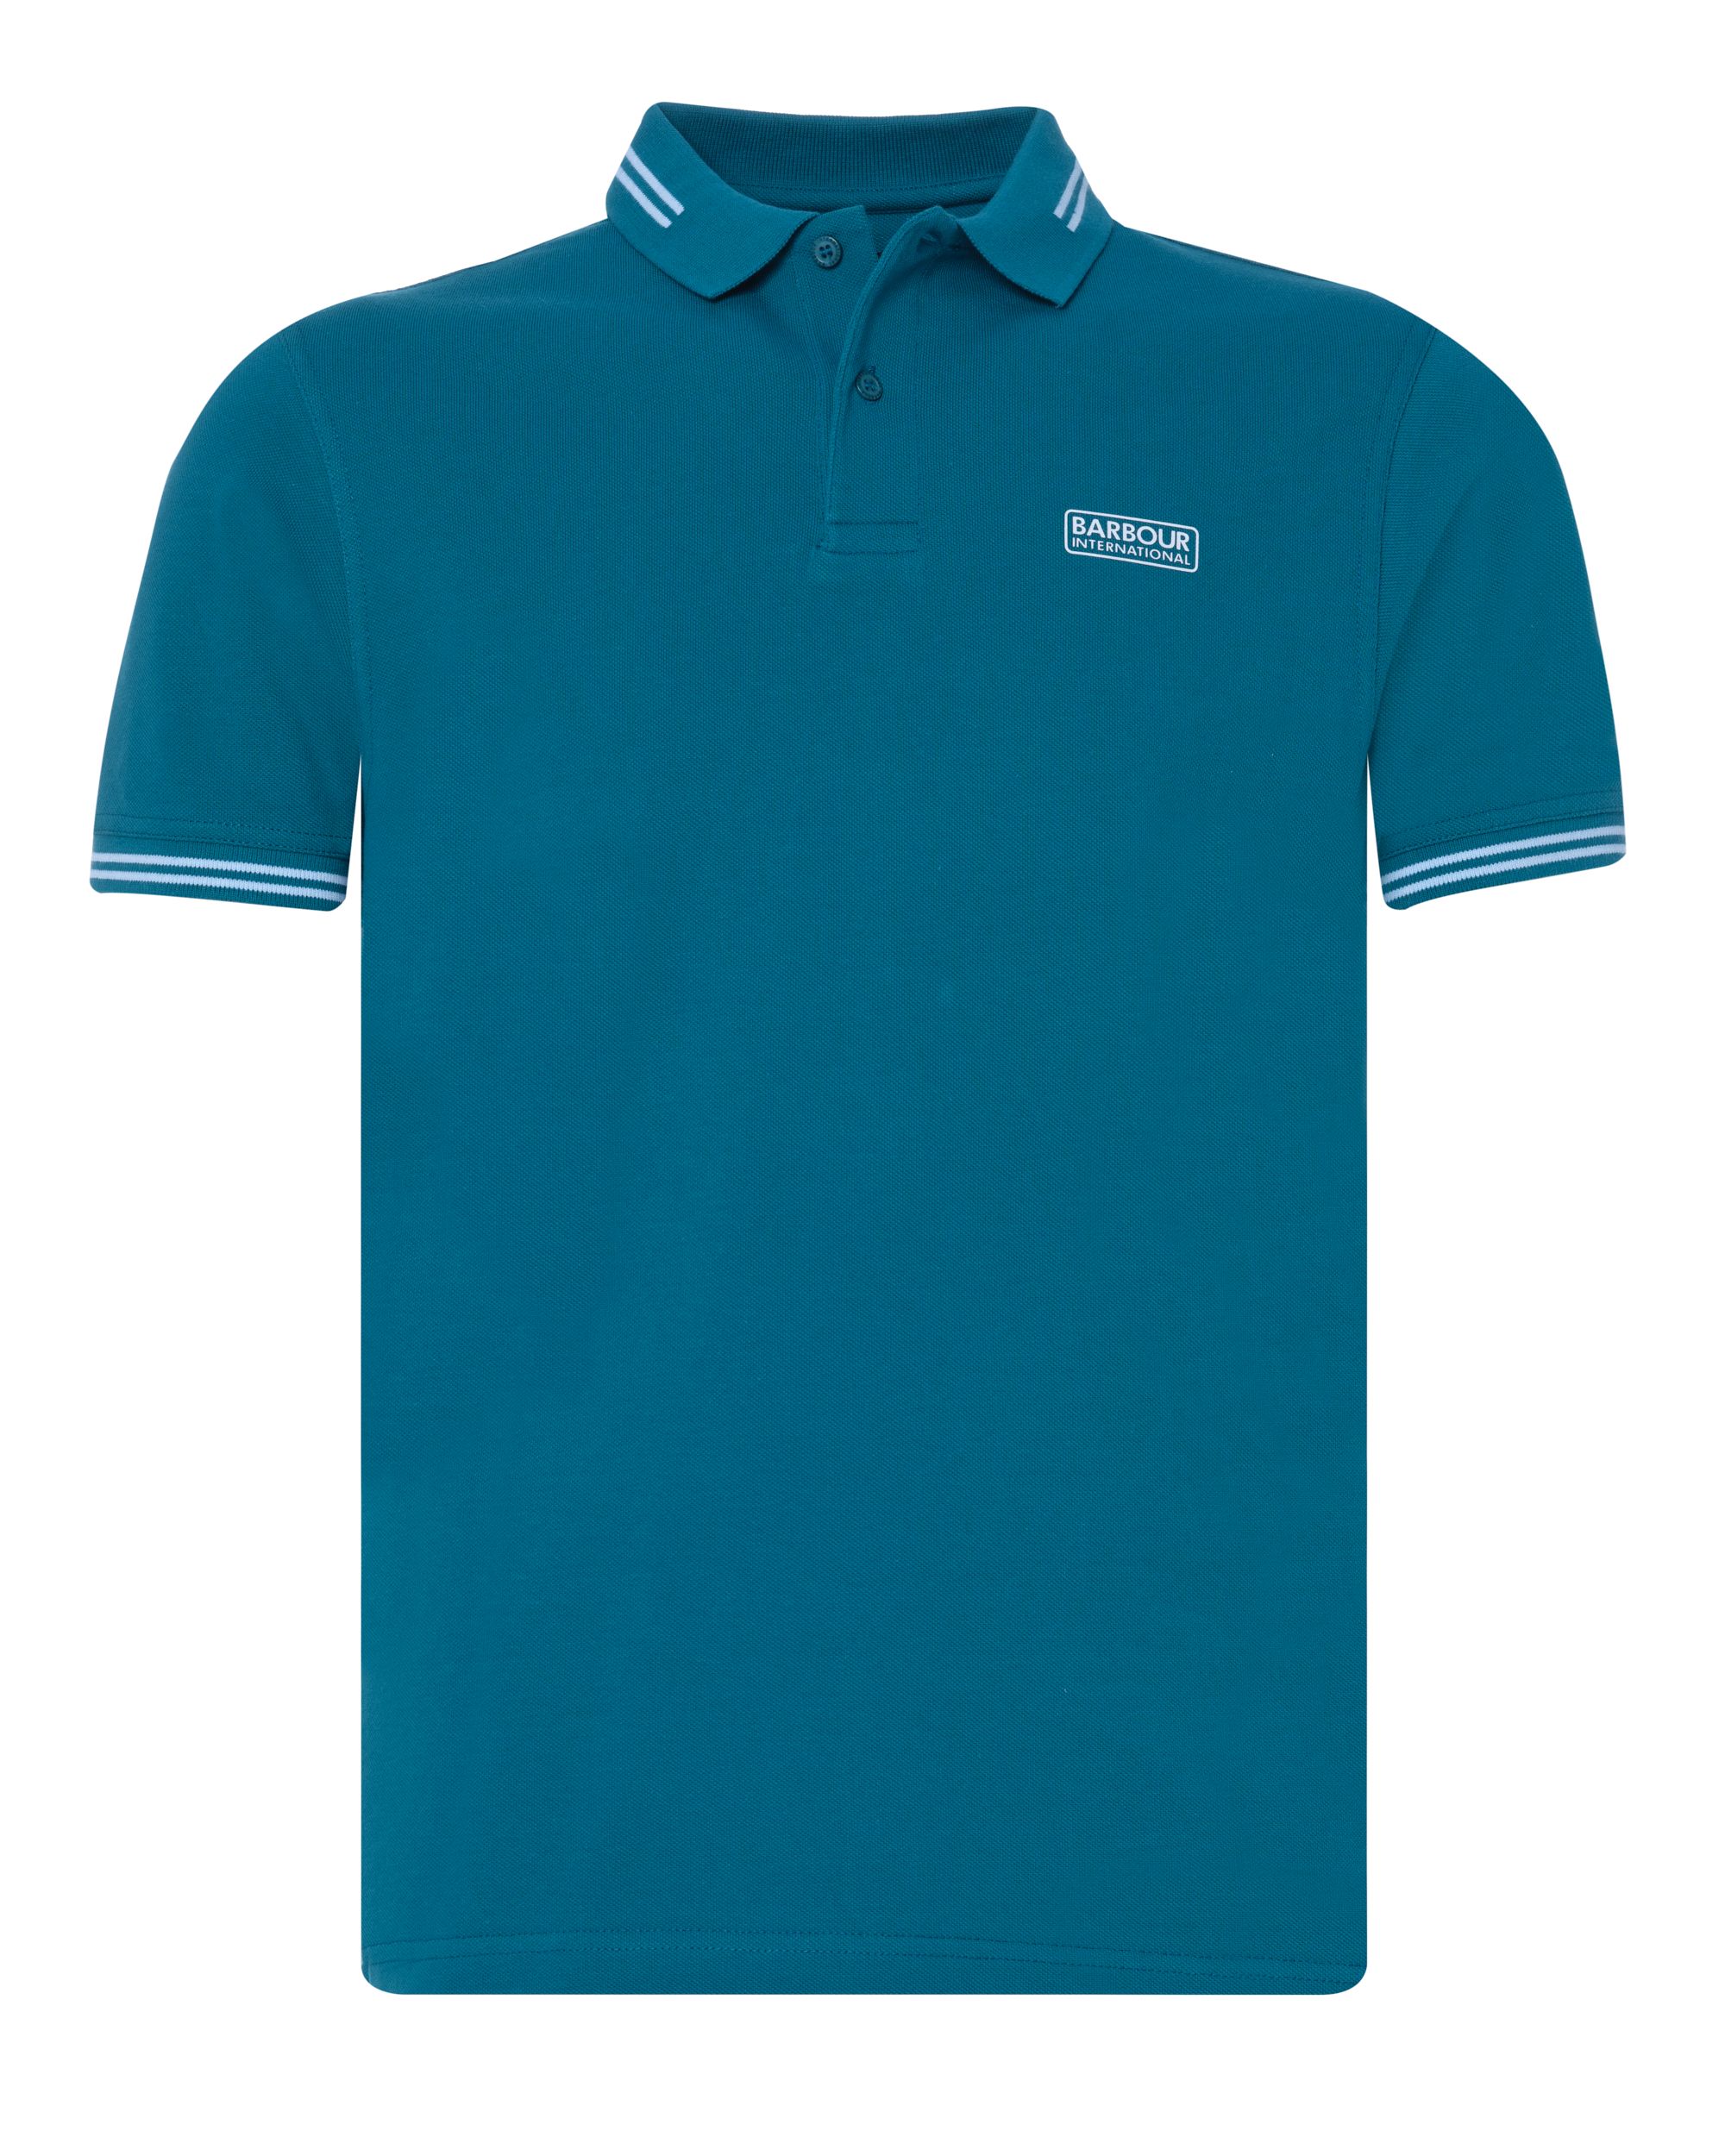 Barbour International Essential tipped Polo KM Groen 075712-001-L